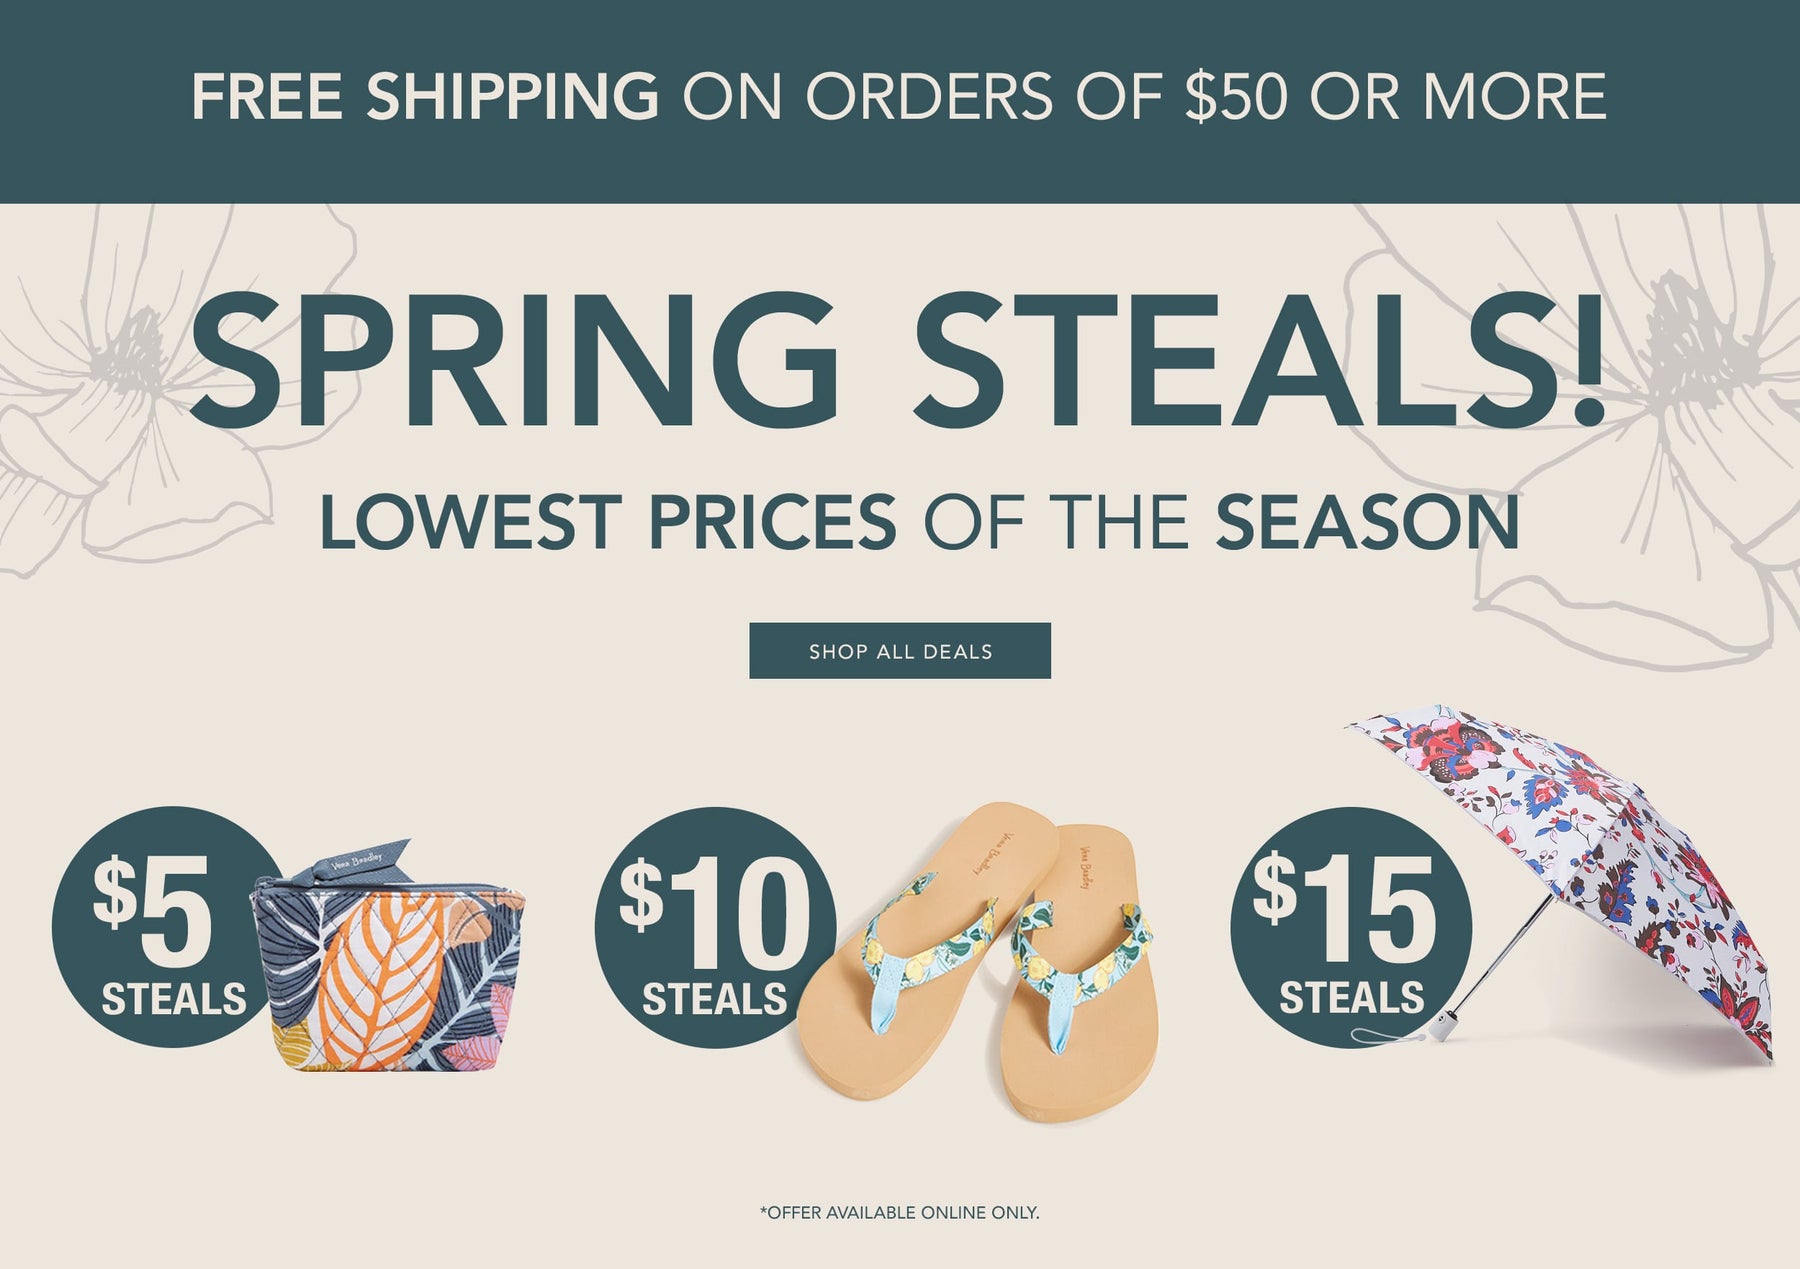 Free Shipping on orders of $50 or more. Spring Steals. Lowest prices of the season. Shop All Deals.